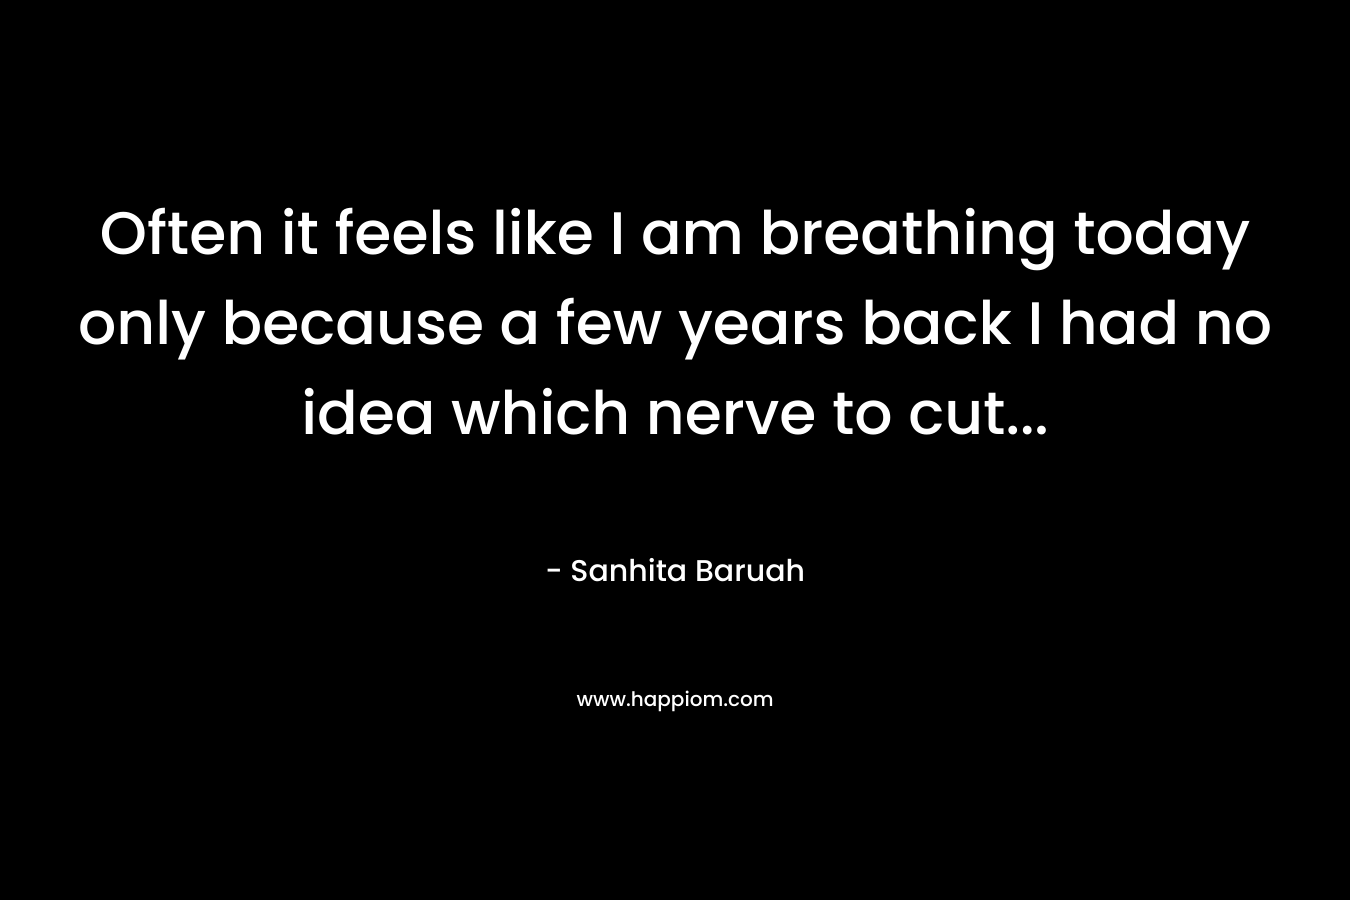 Often it feels like I am breathing today only because a few years back I had no idea which nerve to cut...